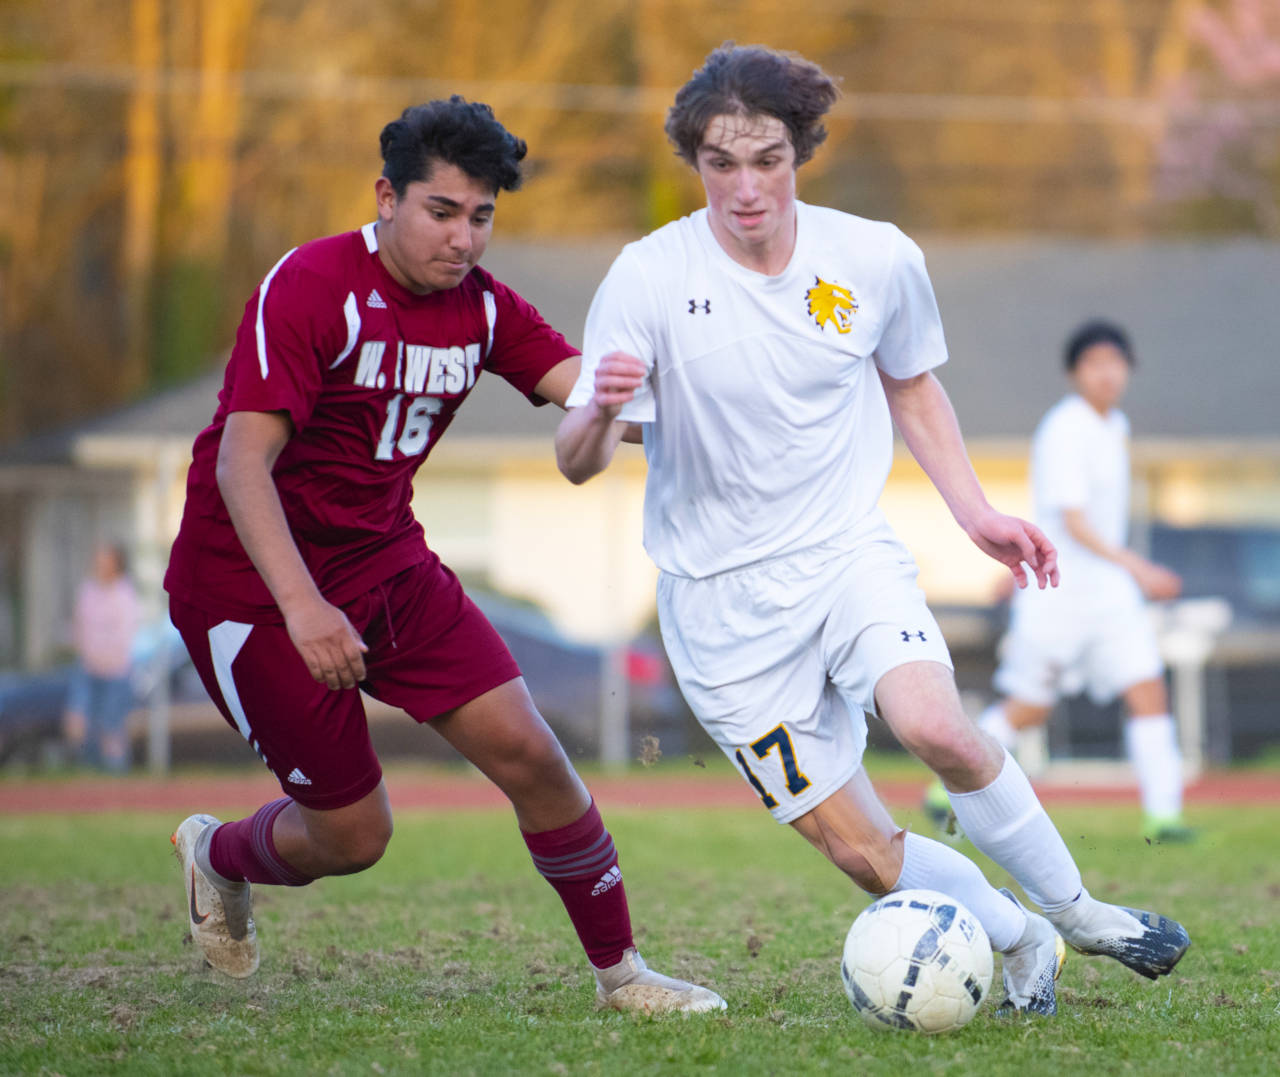 Aberdeen’s Logan Sias, right, dribbles against WF West during the Bobcats 3-1 season-opening loss on Tuesday in Chehalis. (Eric Trent | The Chronicle)